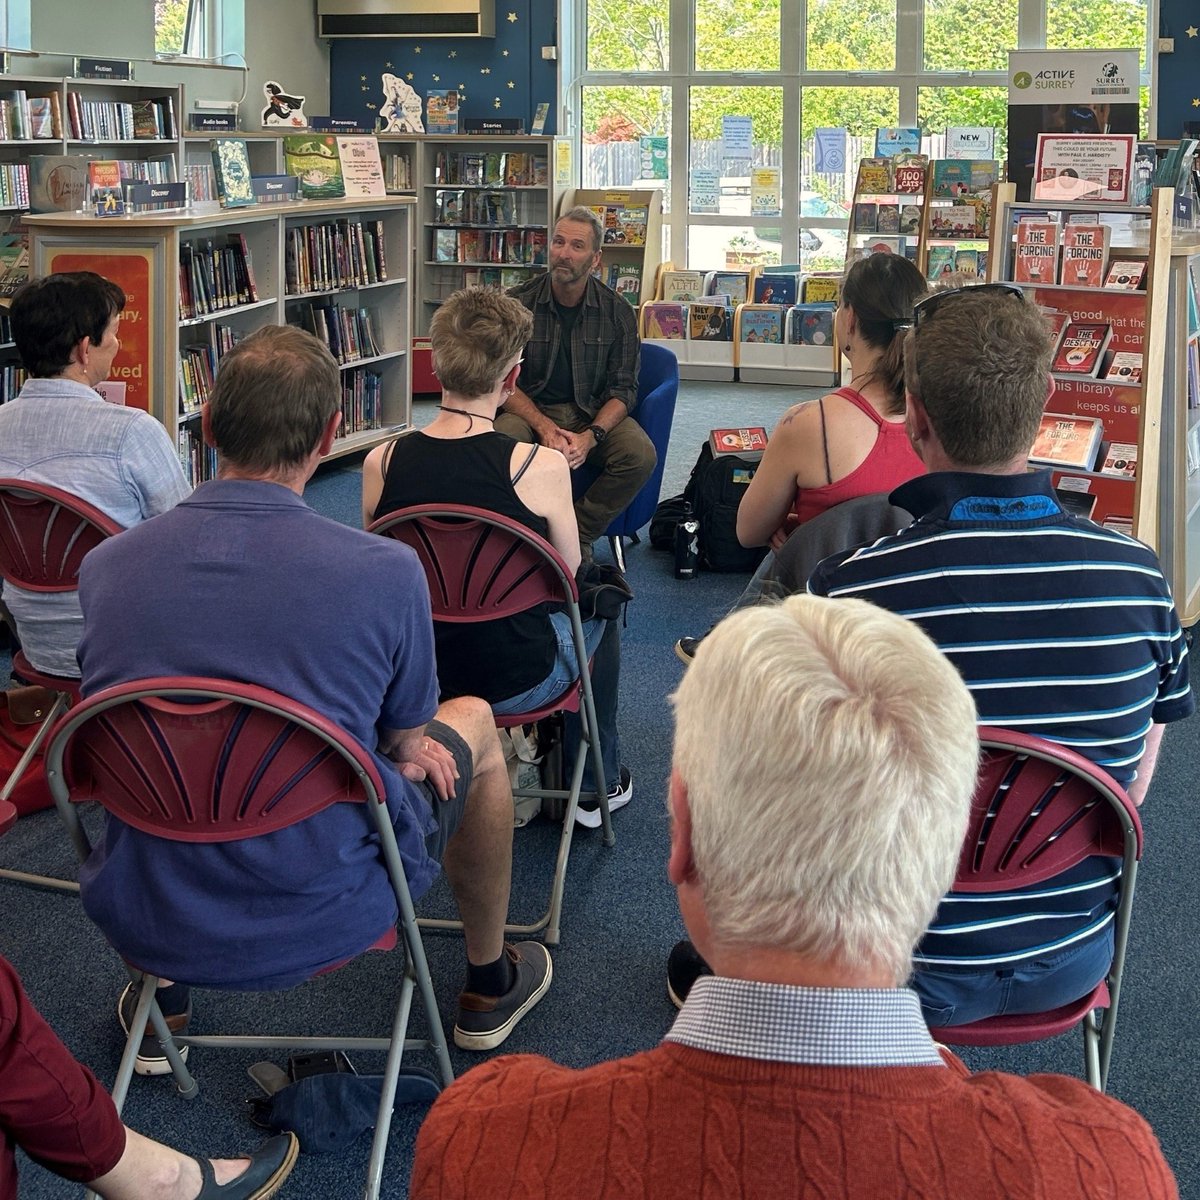 We hosted Paul E. Hardisty for an inspiring author talk yesterday! His climate-emergency thrillers The Forcing and The Descent are engaging cautionary tales, with Paul sharing how to find the courage to address the climate crisis. Thank you Paul, Orenda Books and Fourbears Books